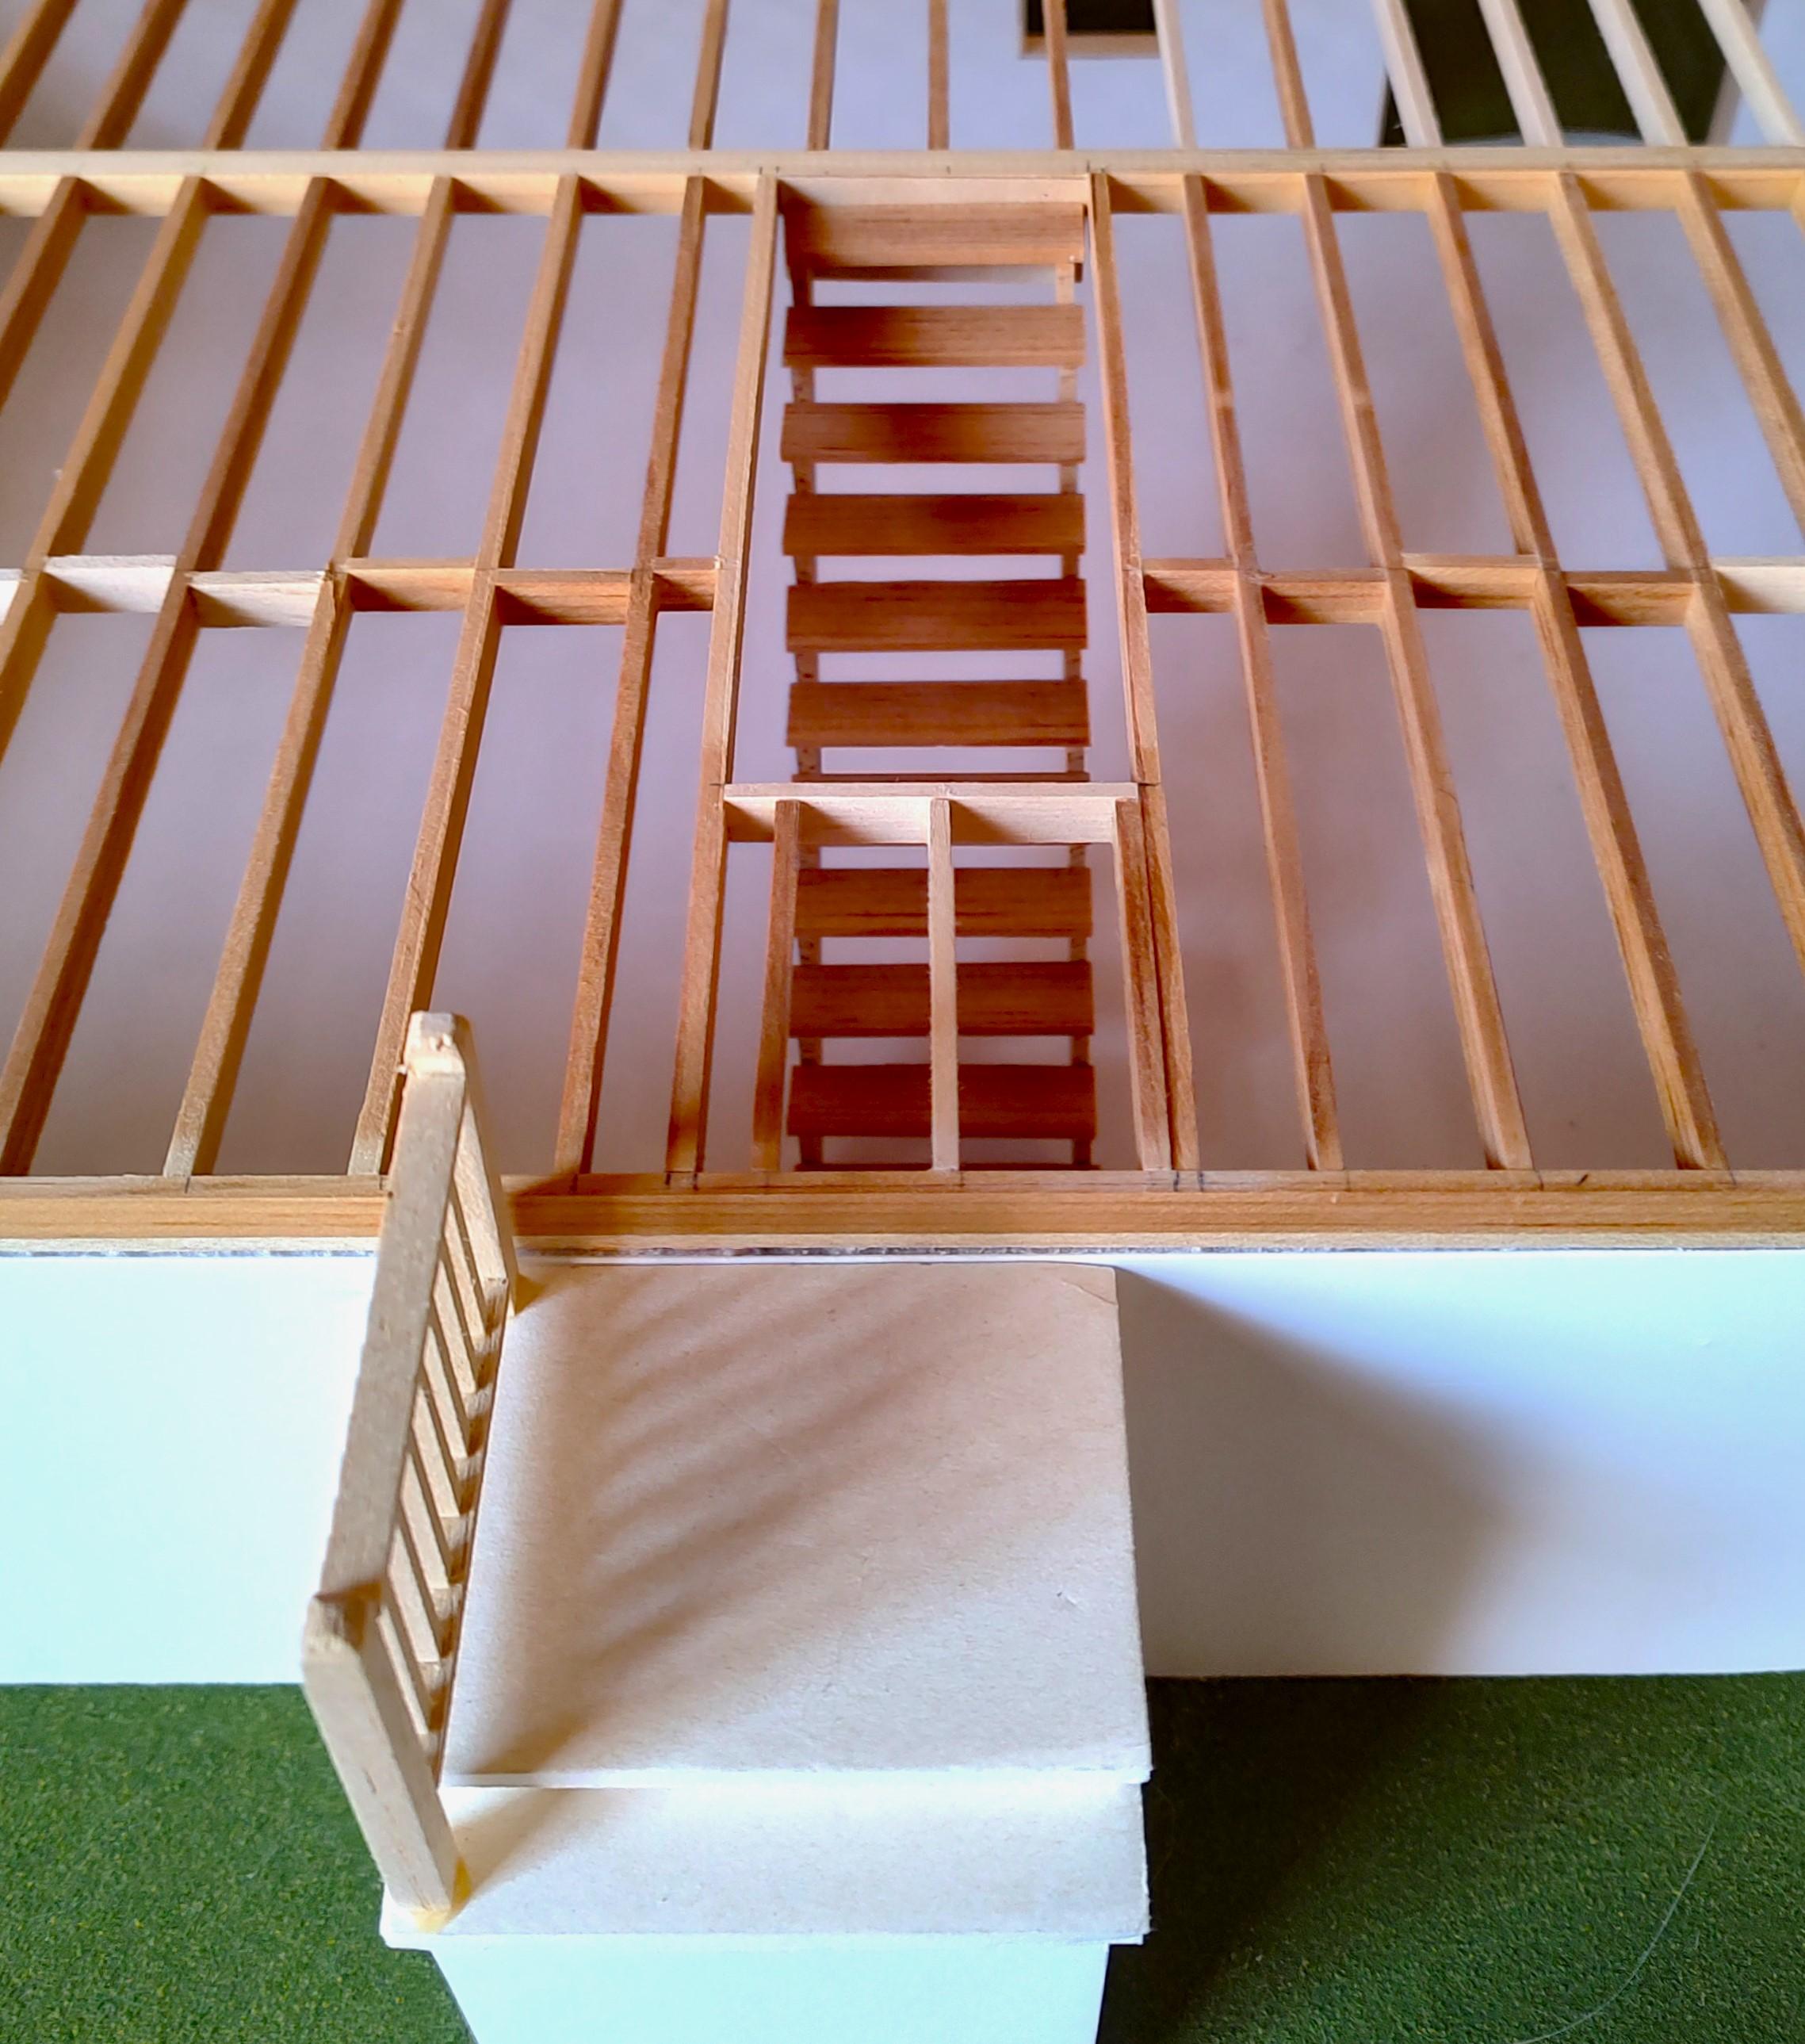 Architectural Model of Timber Framed House 3